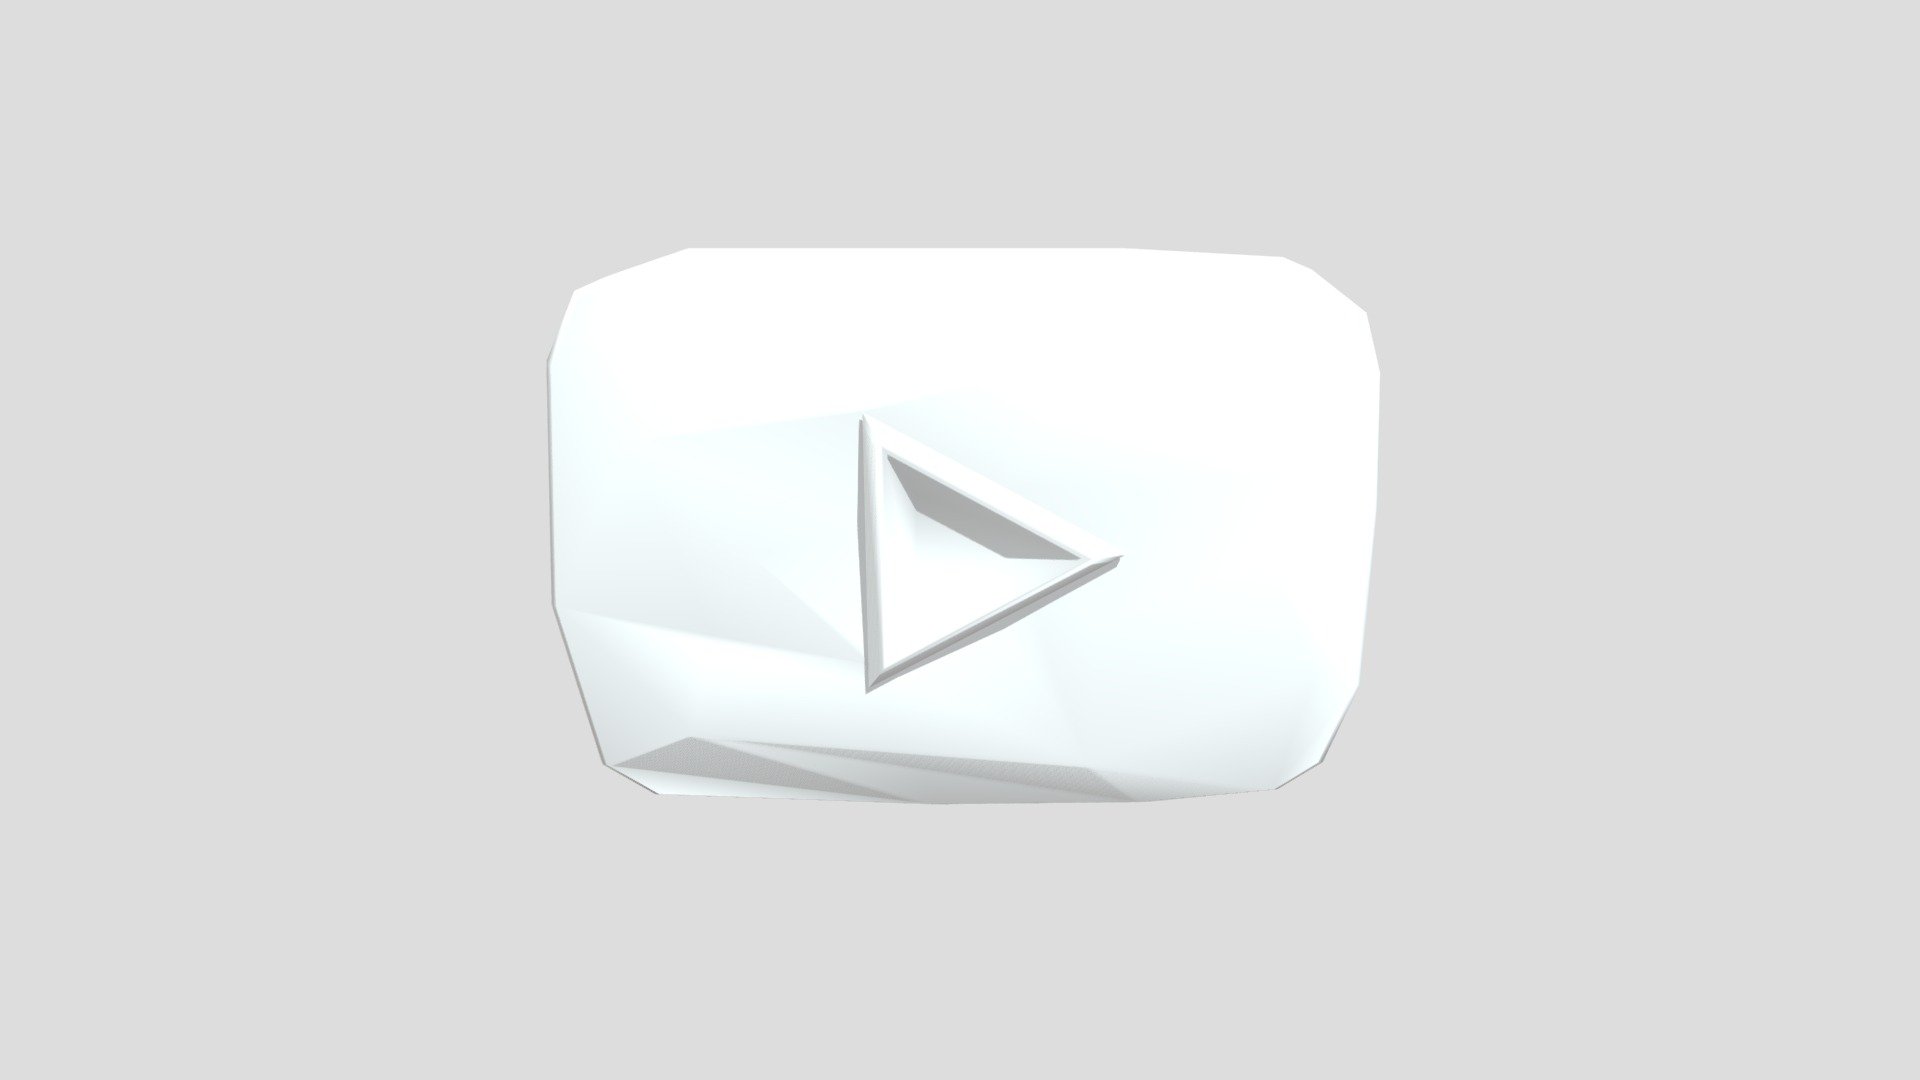 youtube play button red diamond